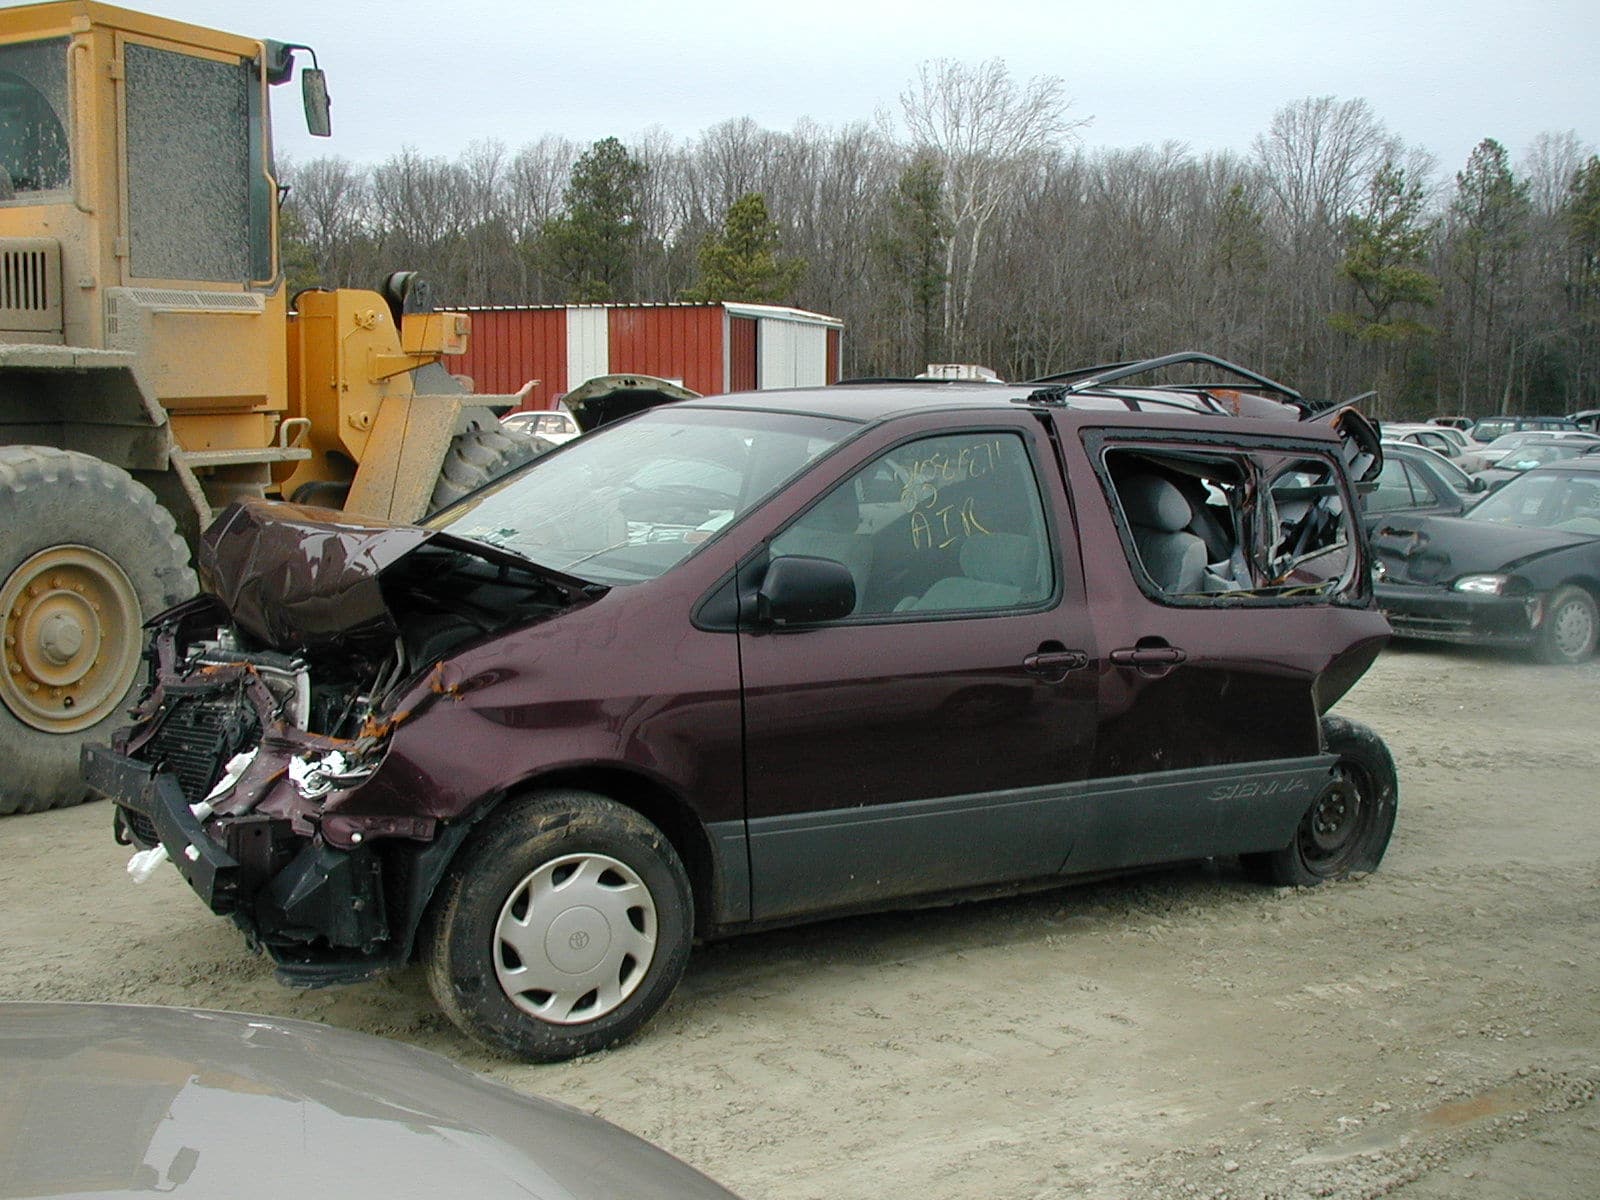 The minivan that Kelly Lang and her family were driving on the day of the crash. (Courtesy/Kelly Lang)